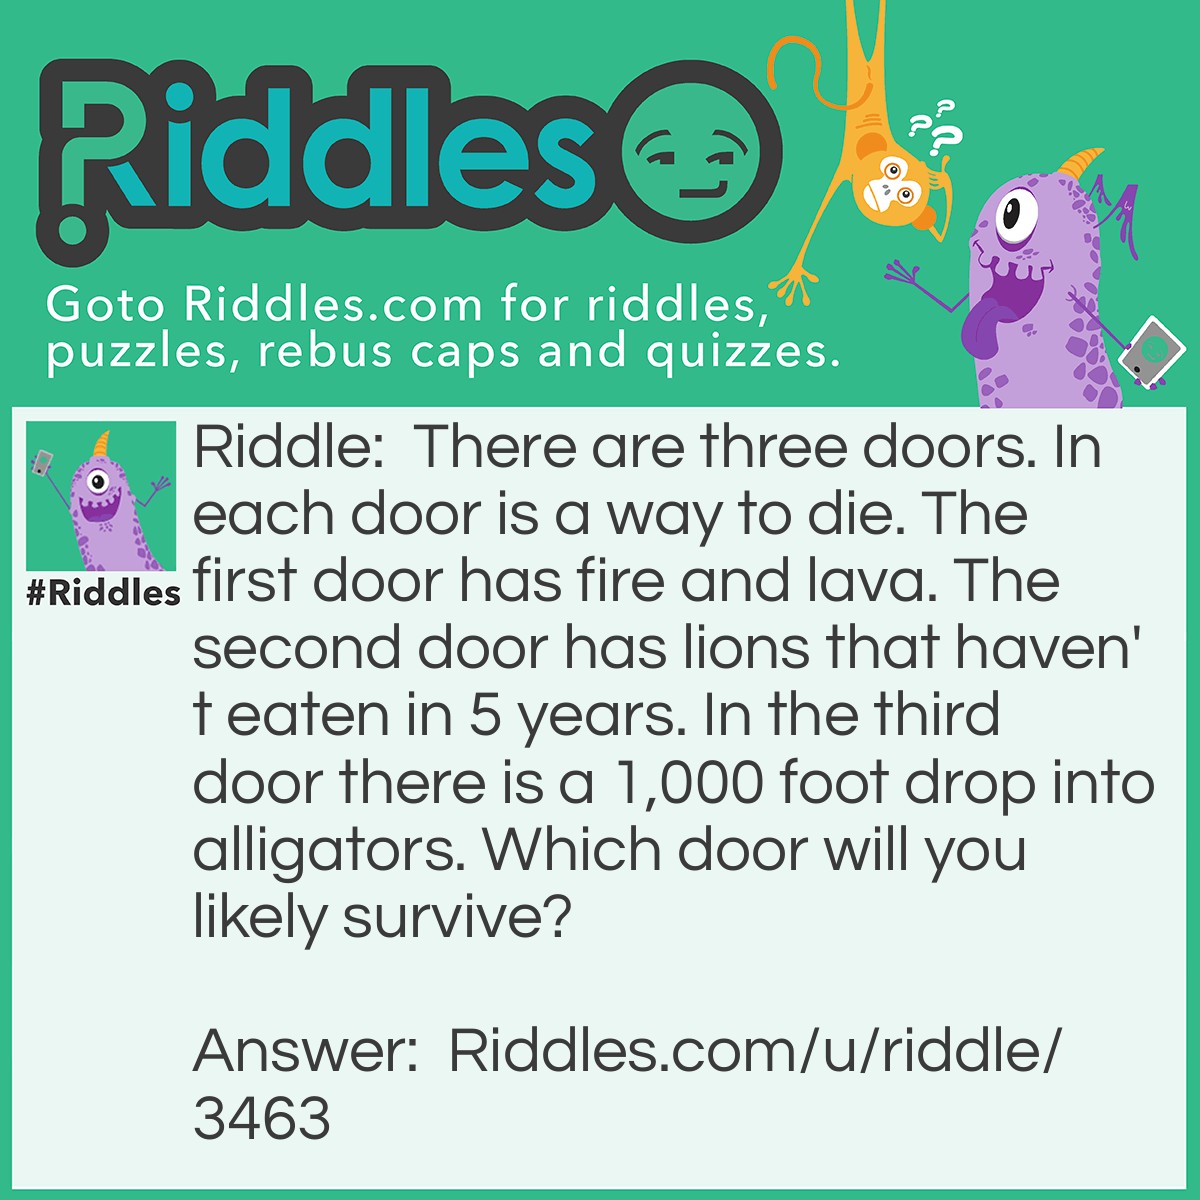 Riddle: There are three doors. In each door is a way to die. The first door has fire and lava. The second door has lions that haven't eaten in 5 years. In the third door there is a 1,000 foot drop into alligators. Which door will you likely survive? Answer: The second door with the lions. Since they haven't eaten in 5 years they will have died.